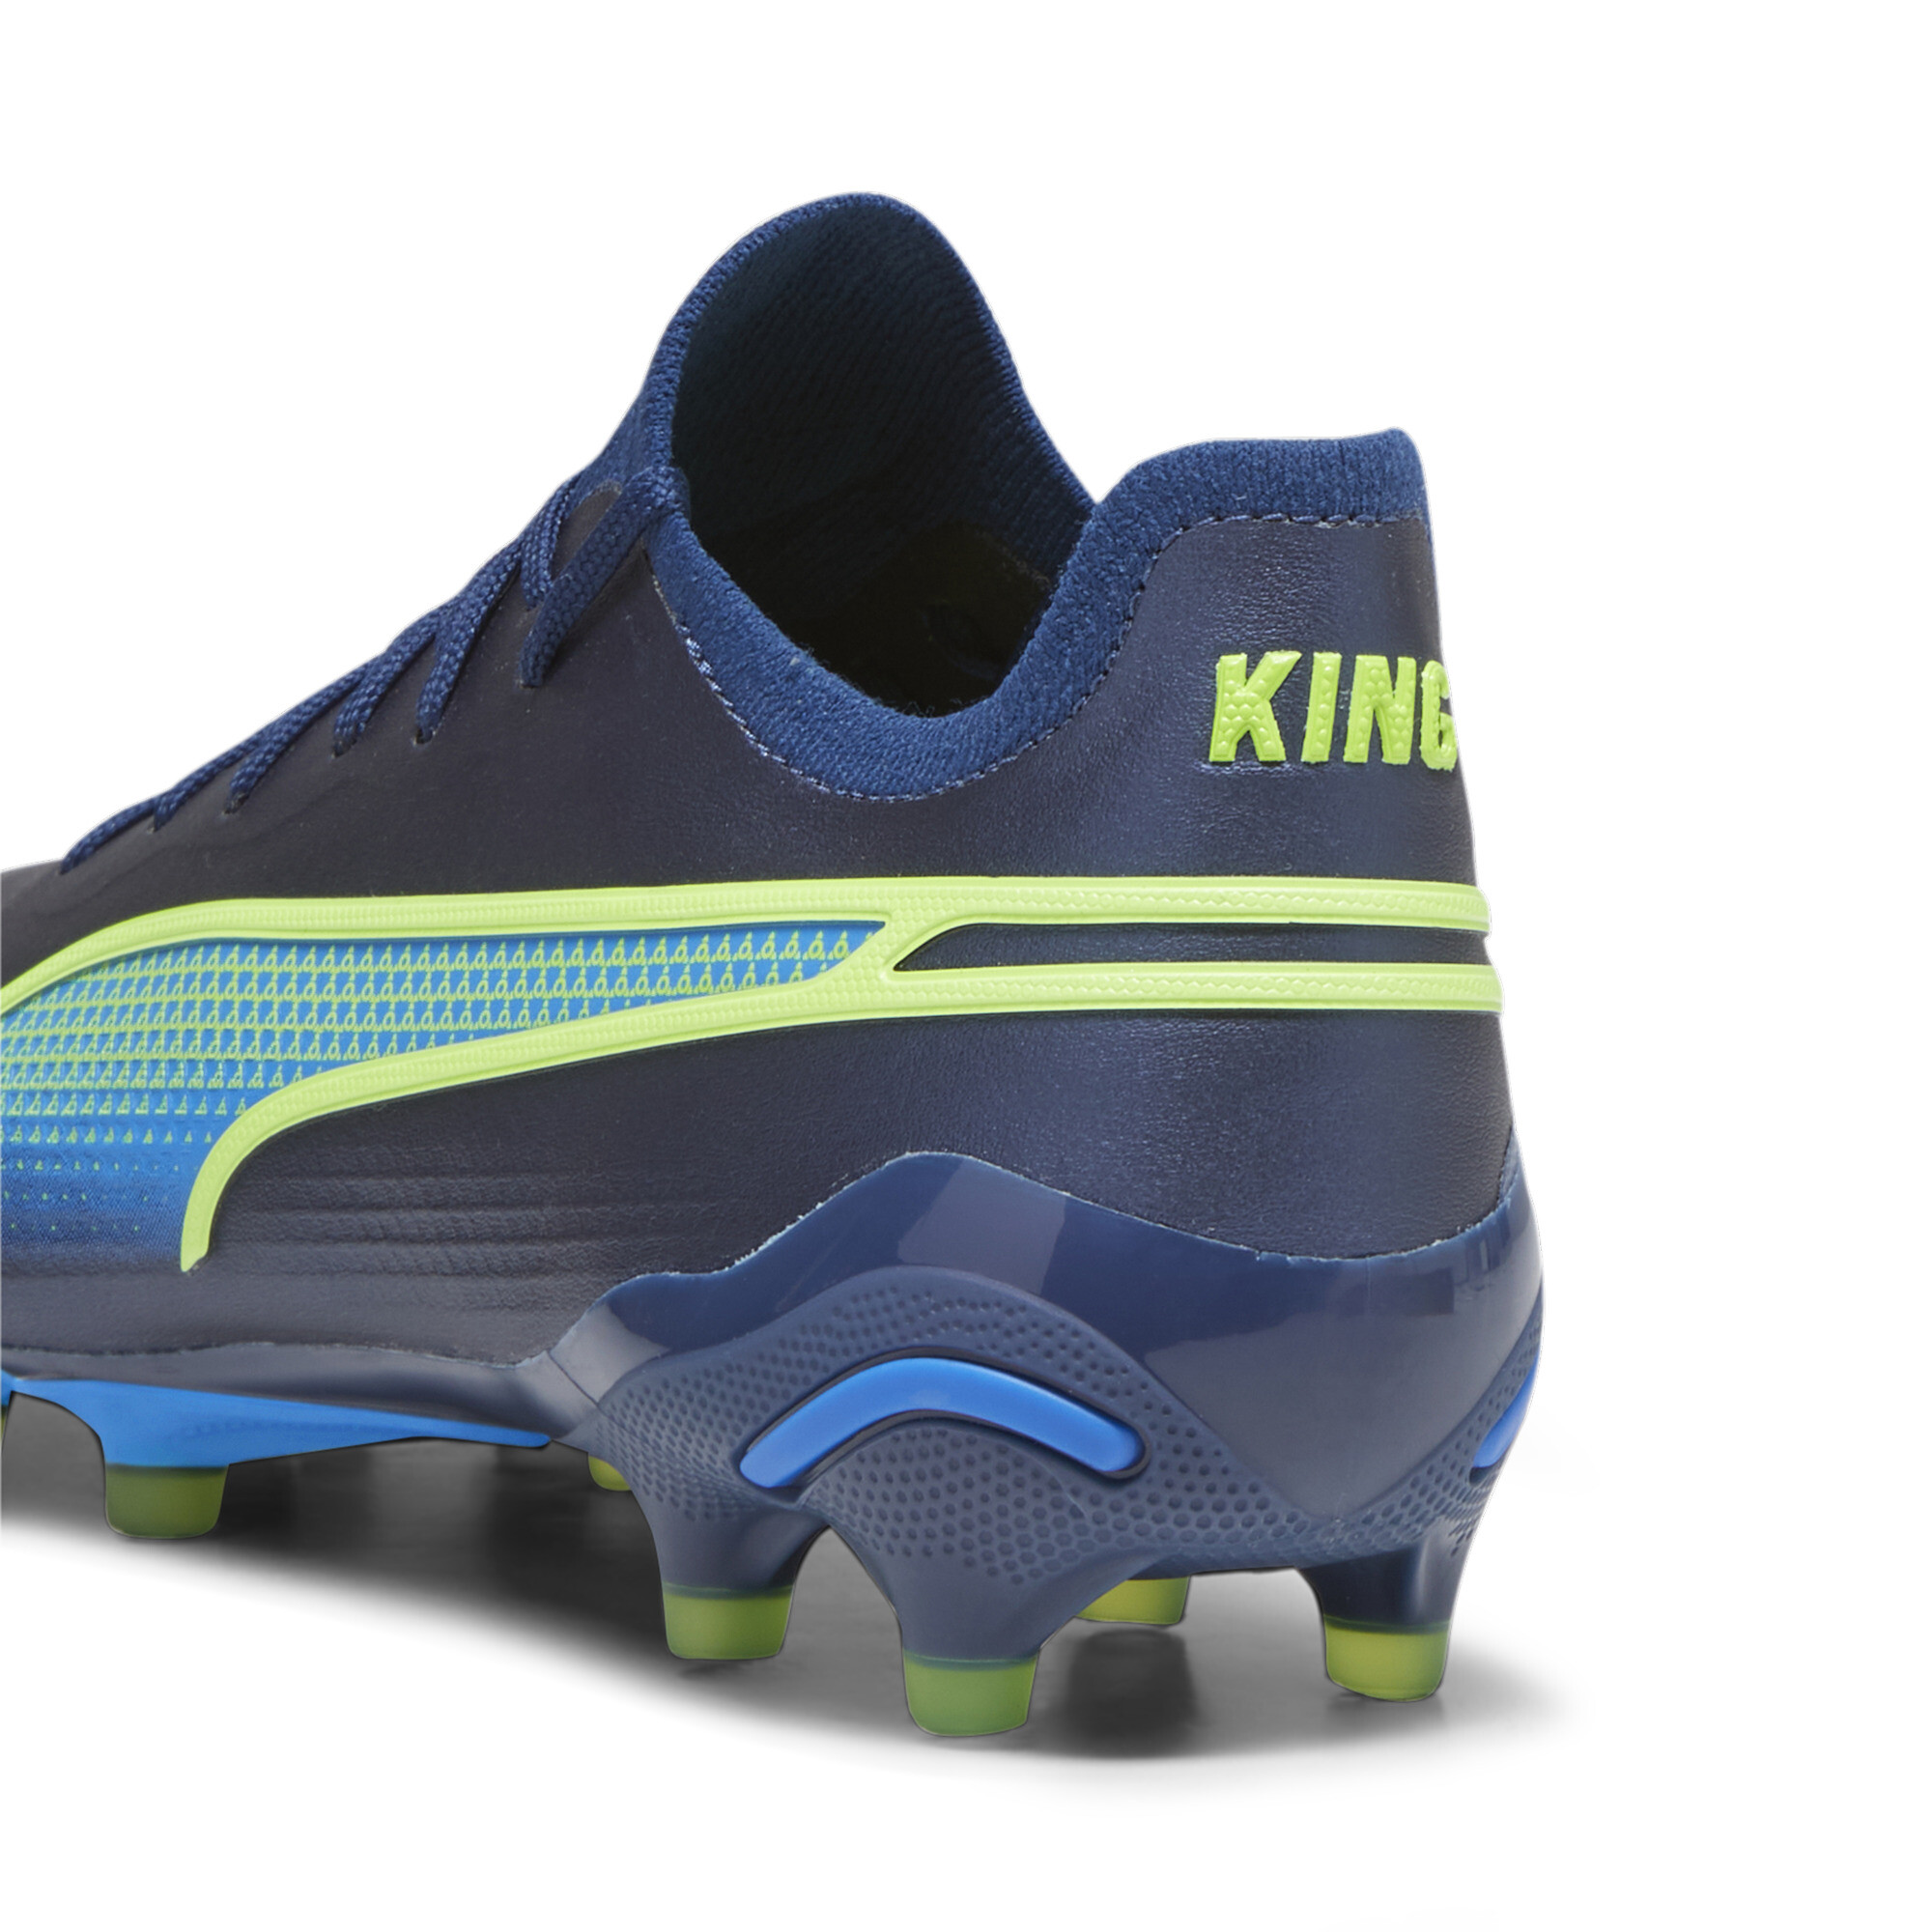 Women's Puma KING ULTIMATE FG/AG's Football Boots, Blue, Size 38, Shoes